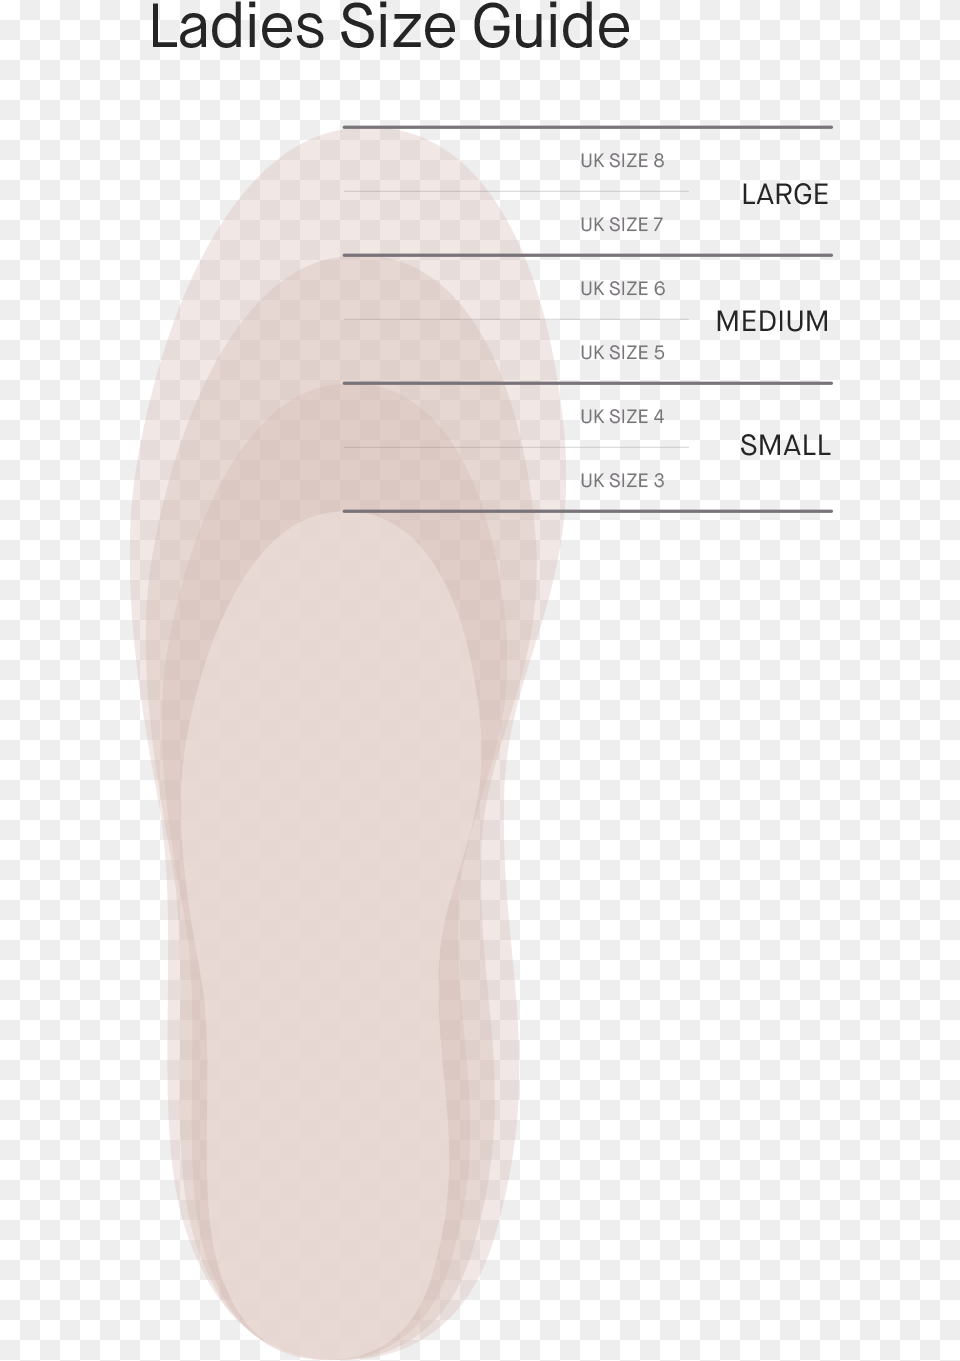 Size Guide Illustration, Body Part, Face, Head, Neck Png Image